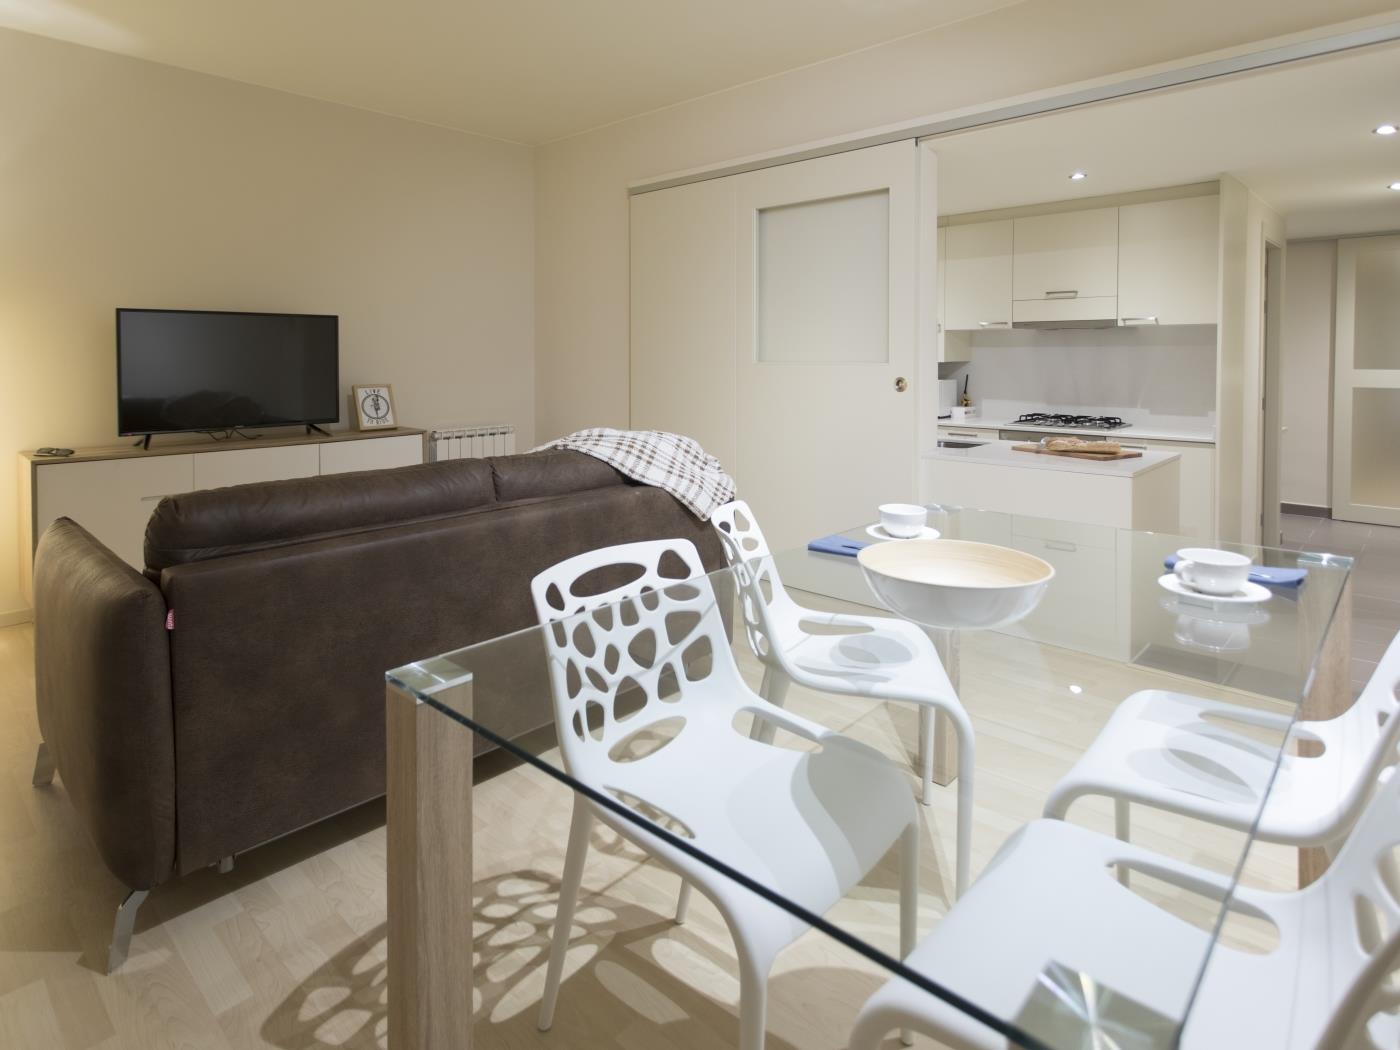 Bravissimo Cort Reial 3A, great apartment in Girona